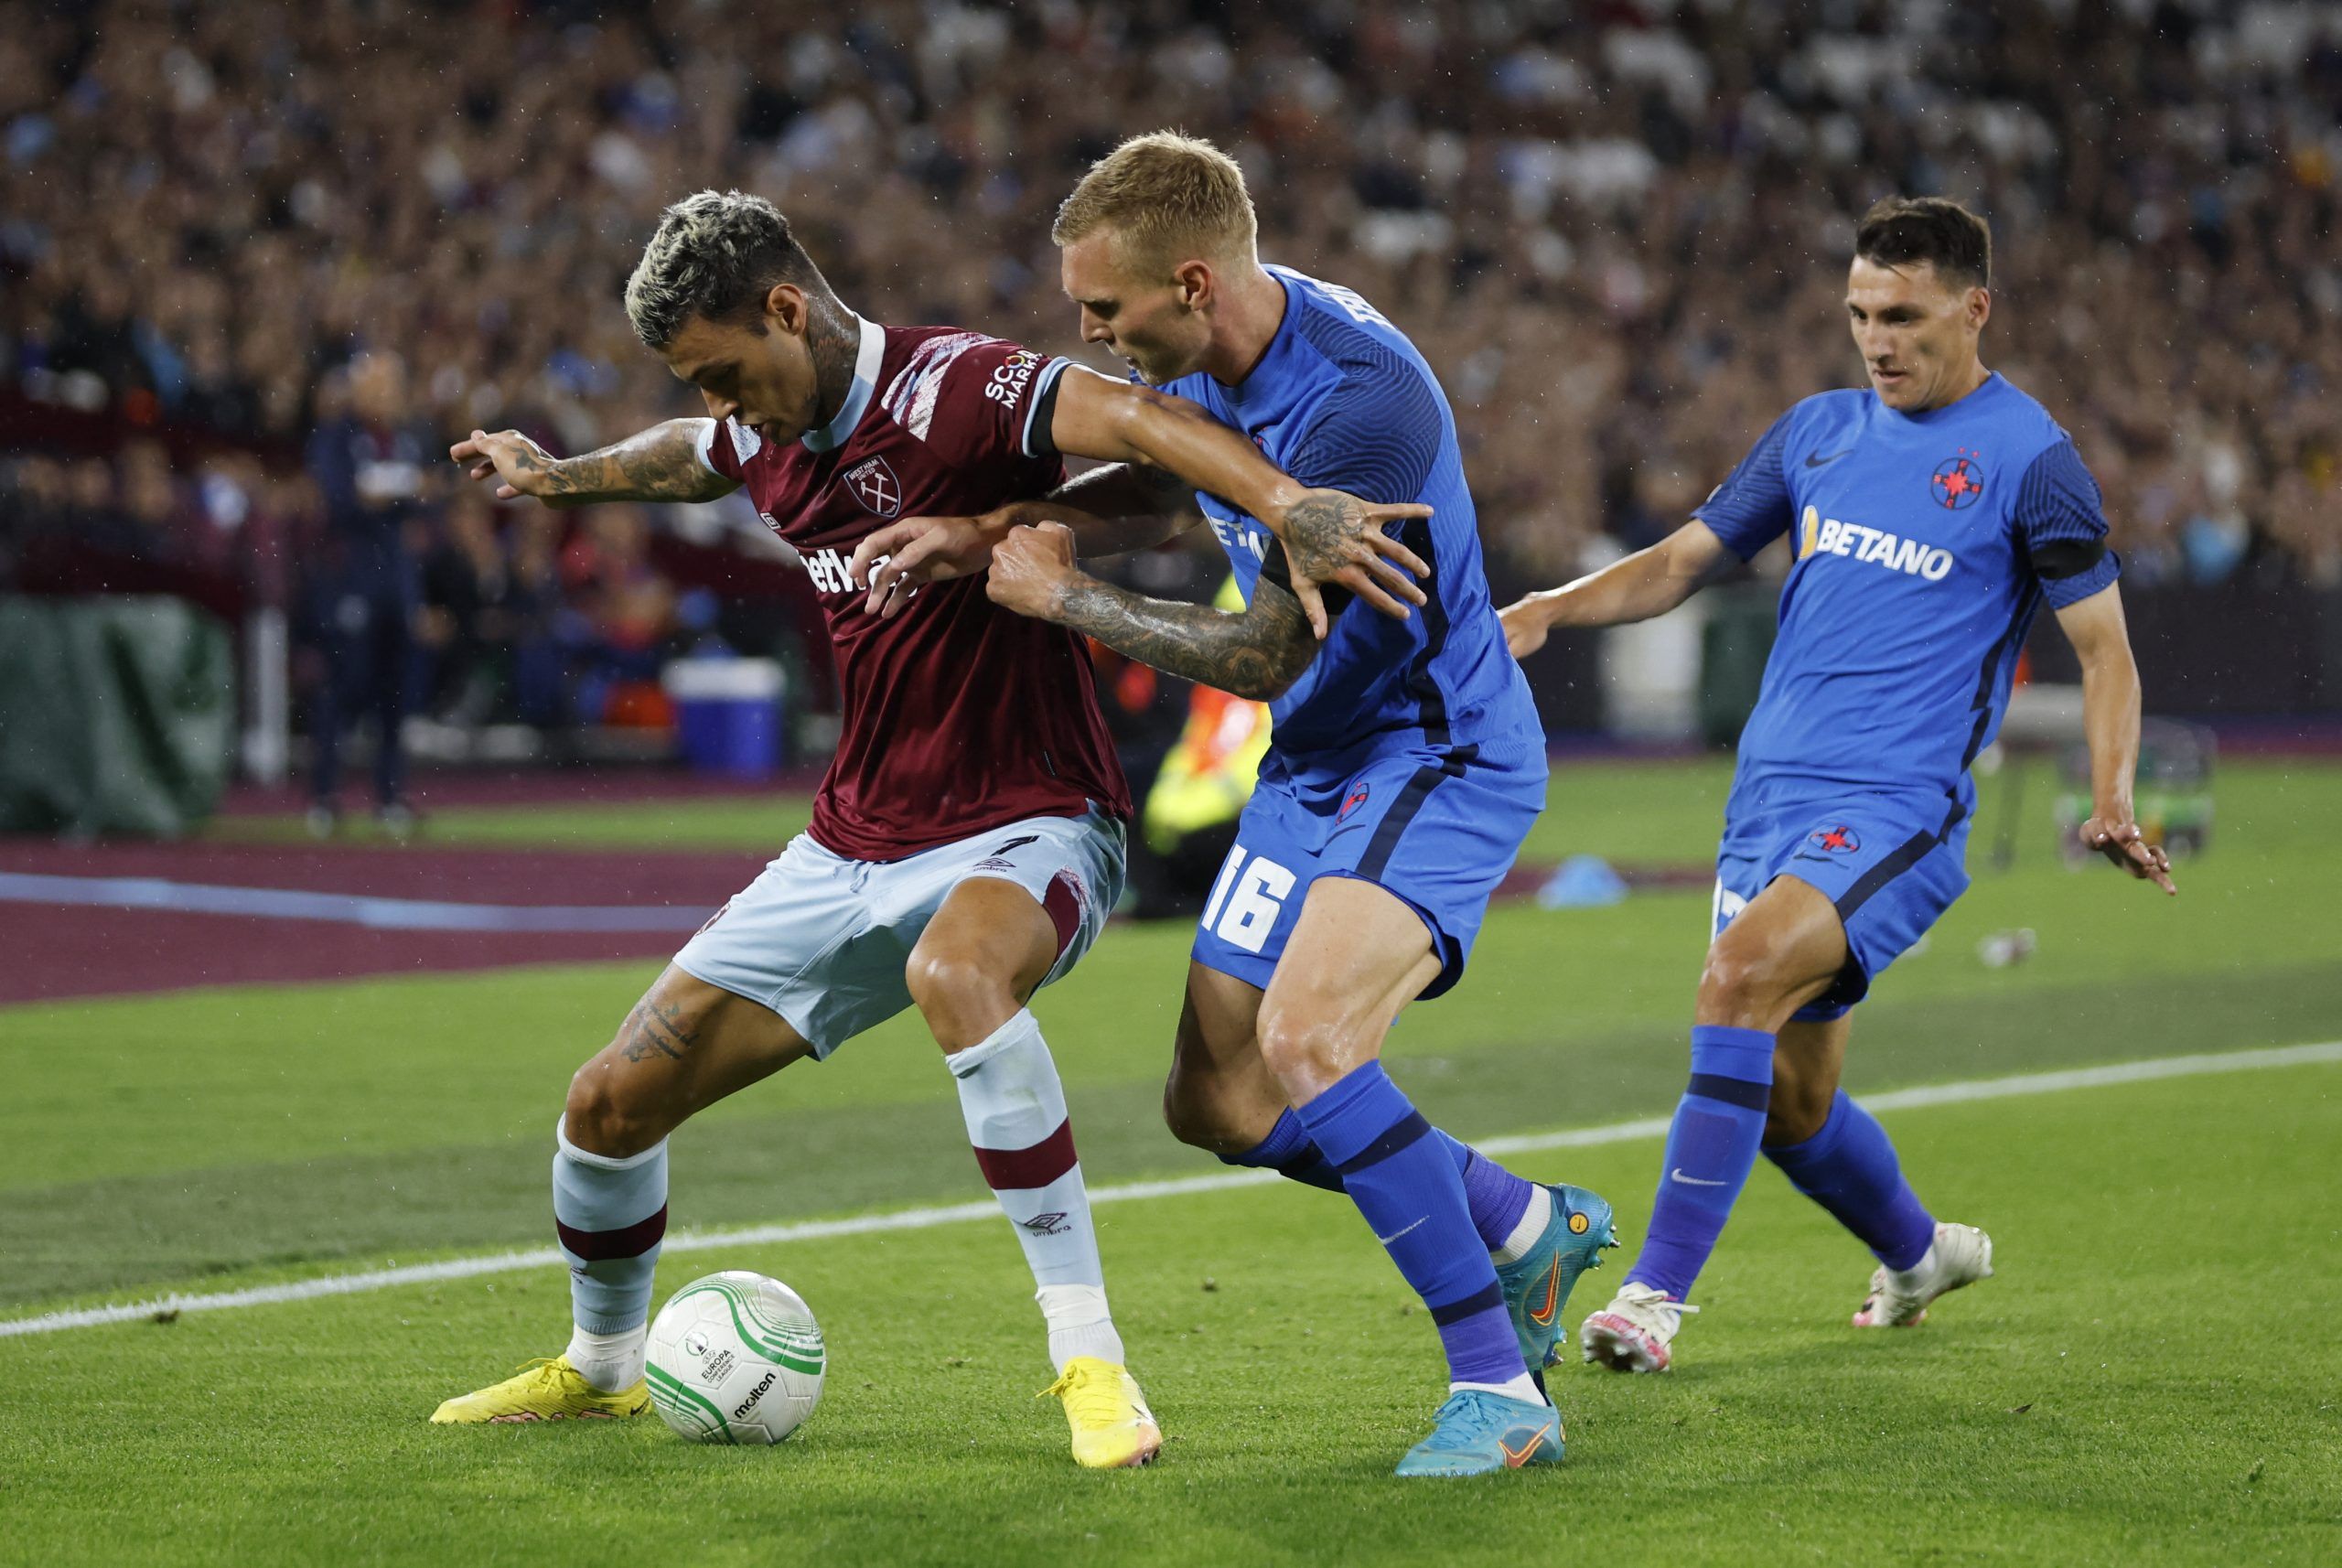 Soccer Football - Europa Conference League - Group B - West Ham United v FCSB - London Stadium, London, Britain - September 8, 2022 West Ham United's Gianluca Scamacca in action with FCSB's Joonas Tamm and Risto Radunovic Action Images via Reuters/Peter Cziborra